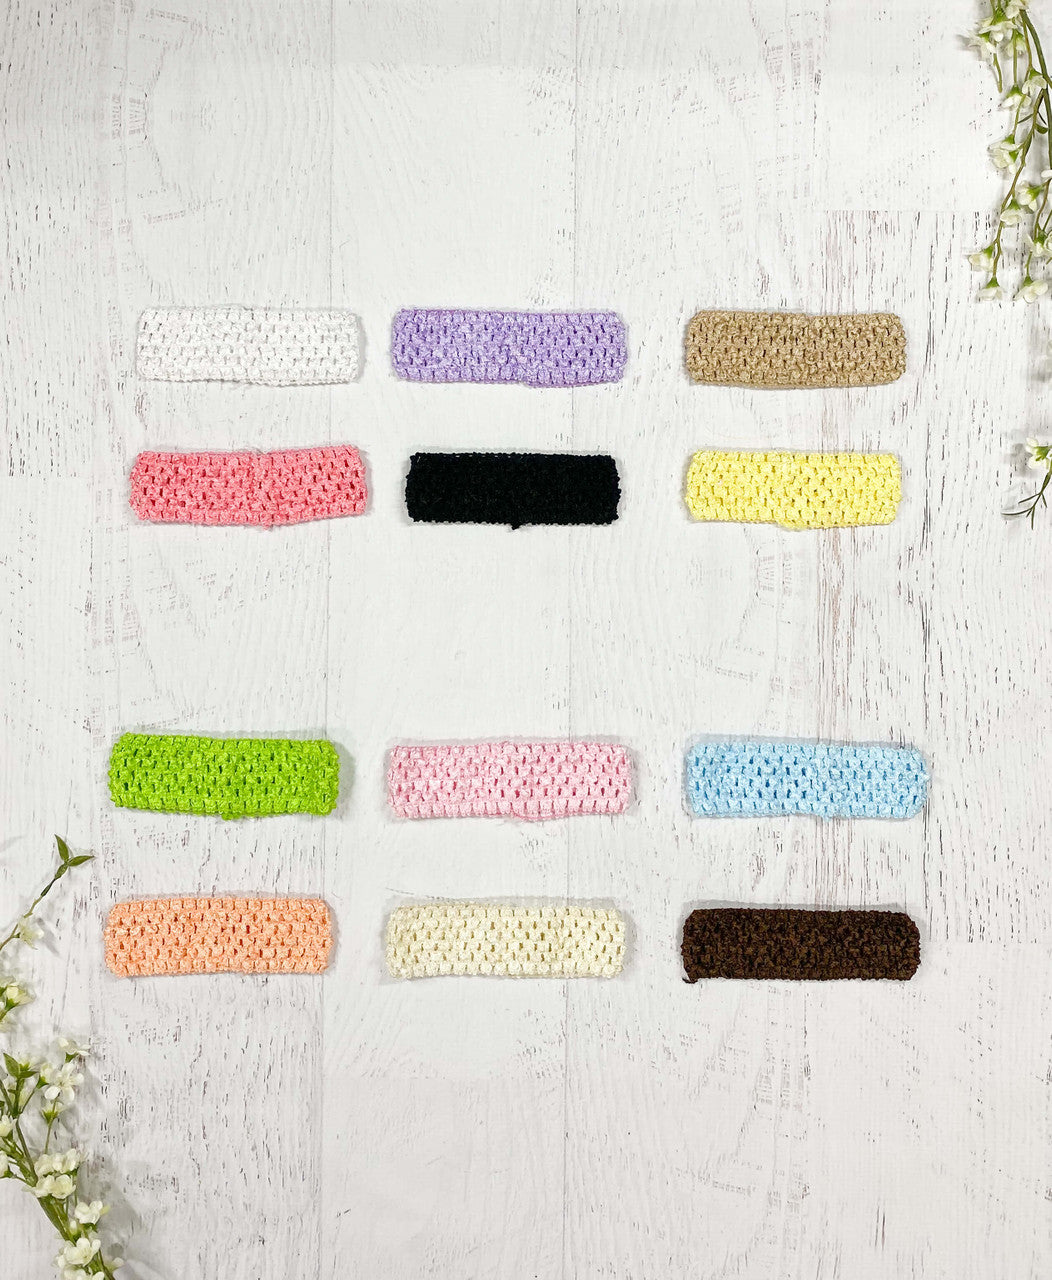 Basic 1.5" Crochet Headband 12-Pack Includes: White, Light Pink, Bubblegum Pink, Lavender, Light Blue, Peach, Light Yellow, Lime, Oatmeal, Chocolate, Ivory, and Black